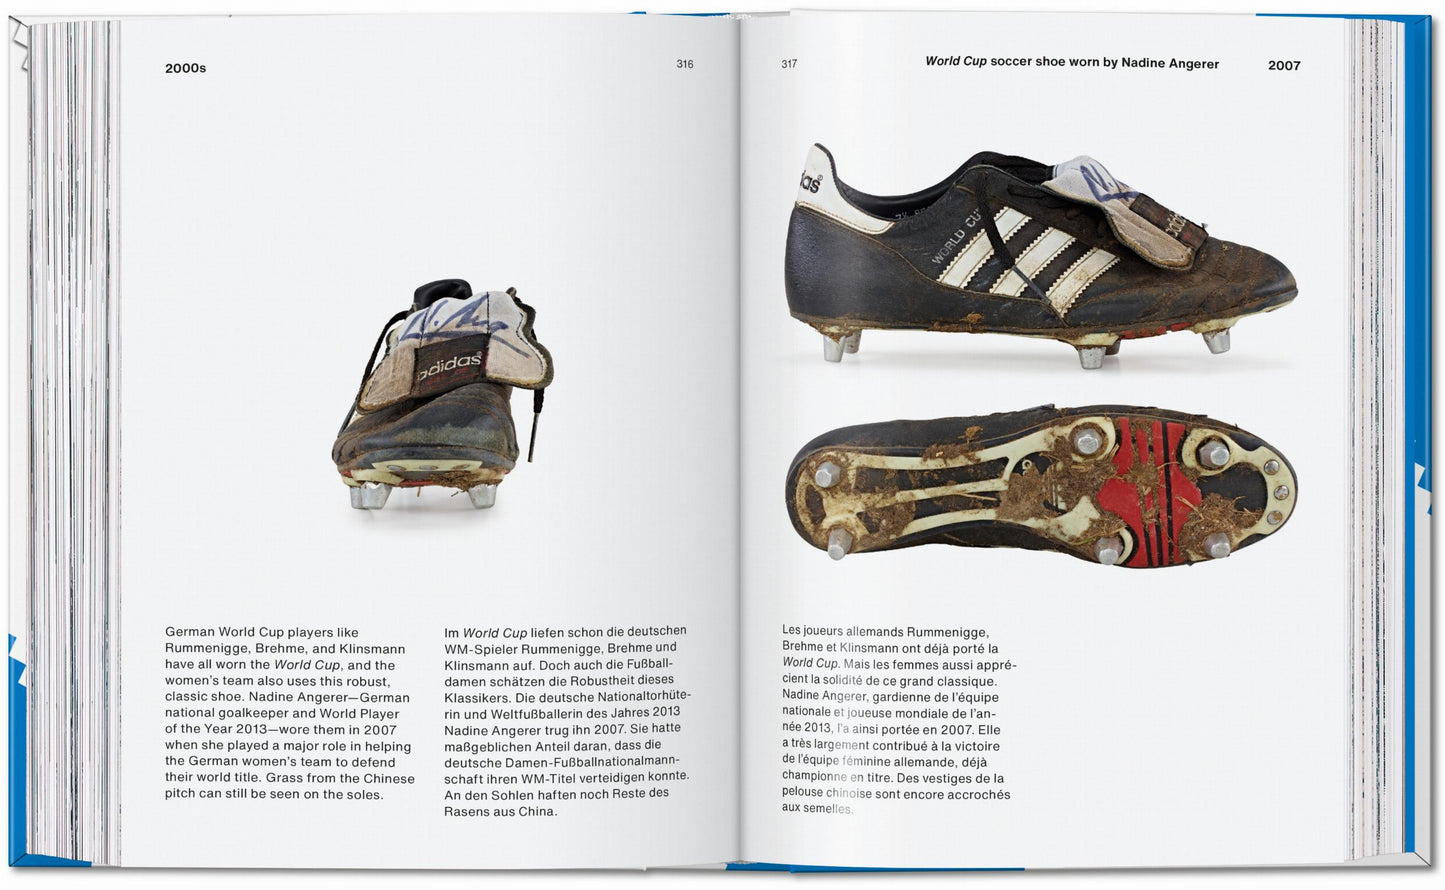 The adidas Archive. The Footwear Collection. 40th Anniversary Edition